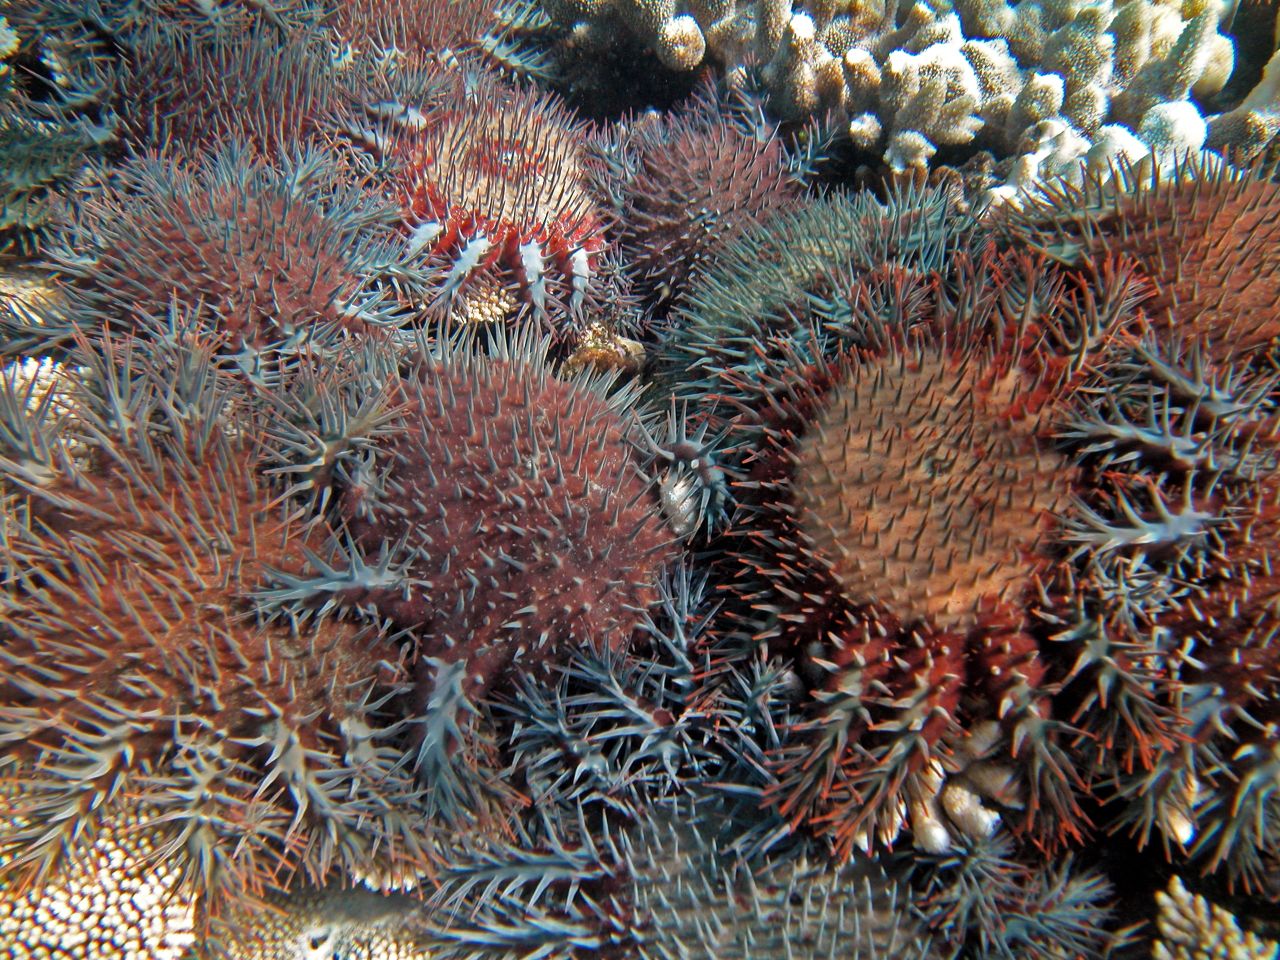 The problem on the Great Barrier Reef, the report says, is that it's facing other threats that are hindering its ability to recover from cyclones, most notably the rampant starfish.